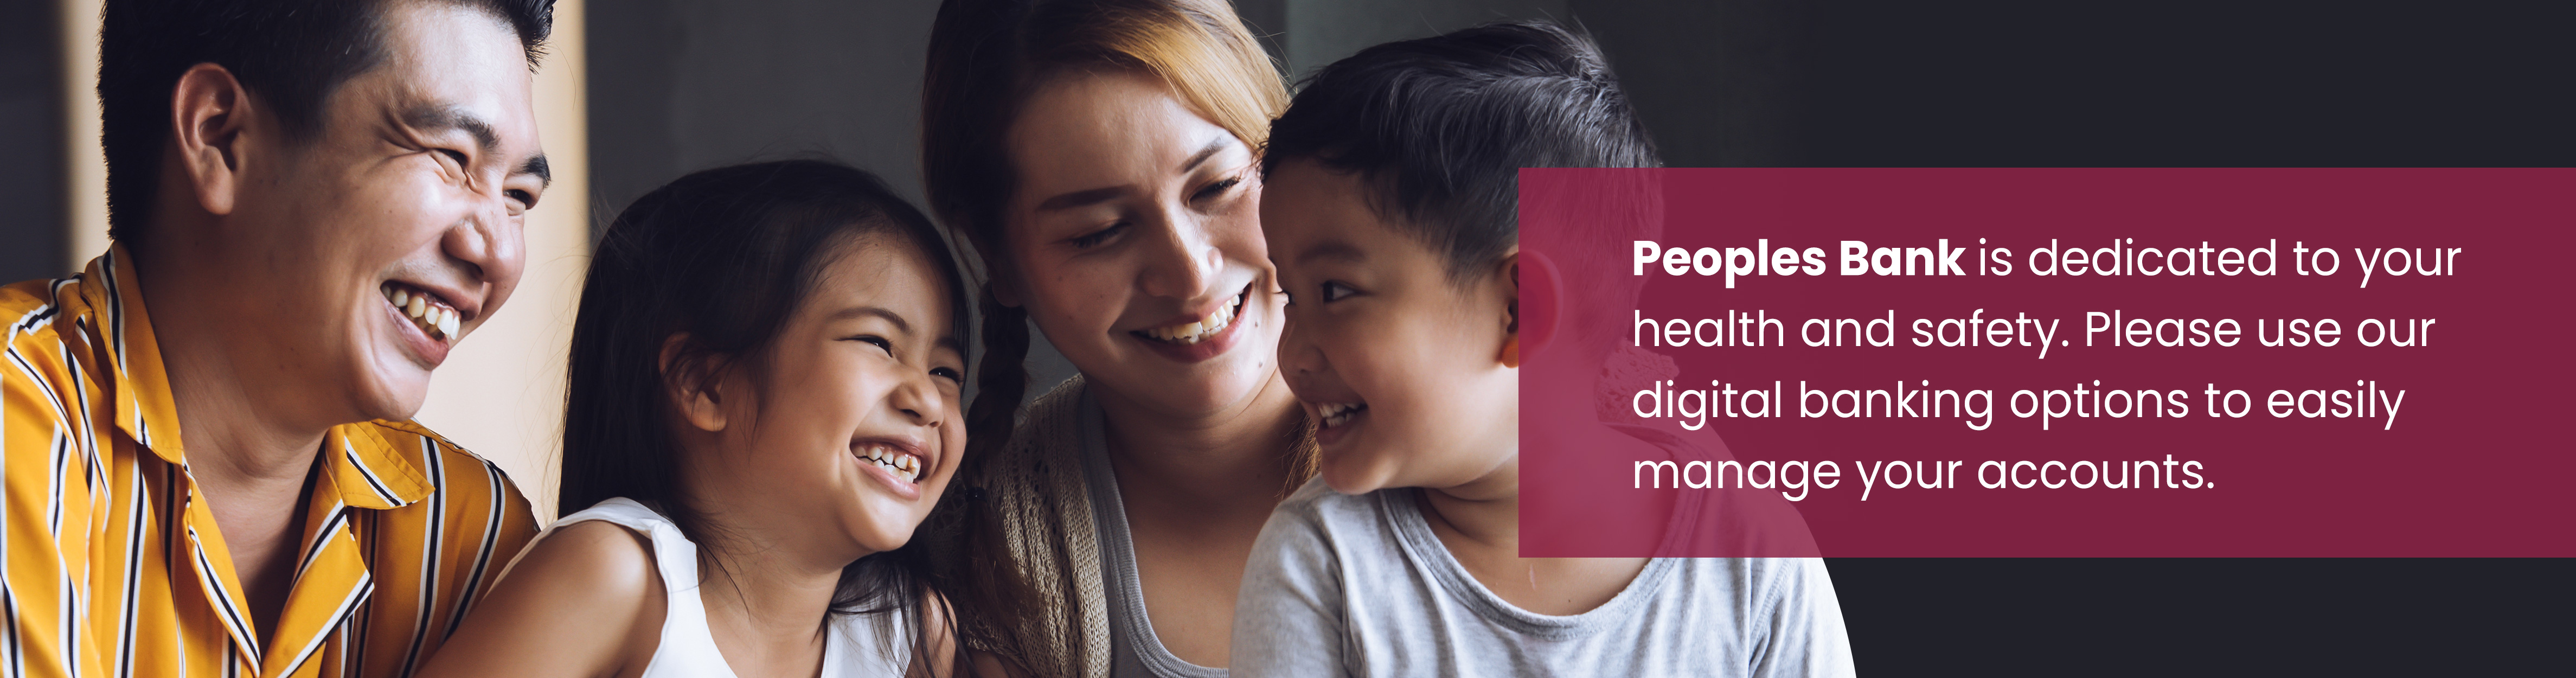 Photo: A family laughing together. Text: Peoples Bank is dedicated to your health and safety. Please use our digital banking options to easily manage your accounts.